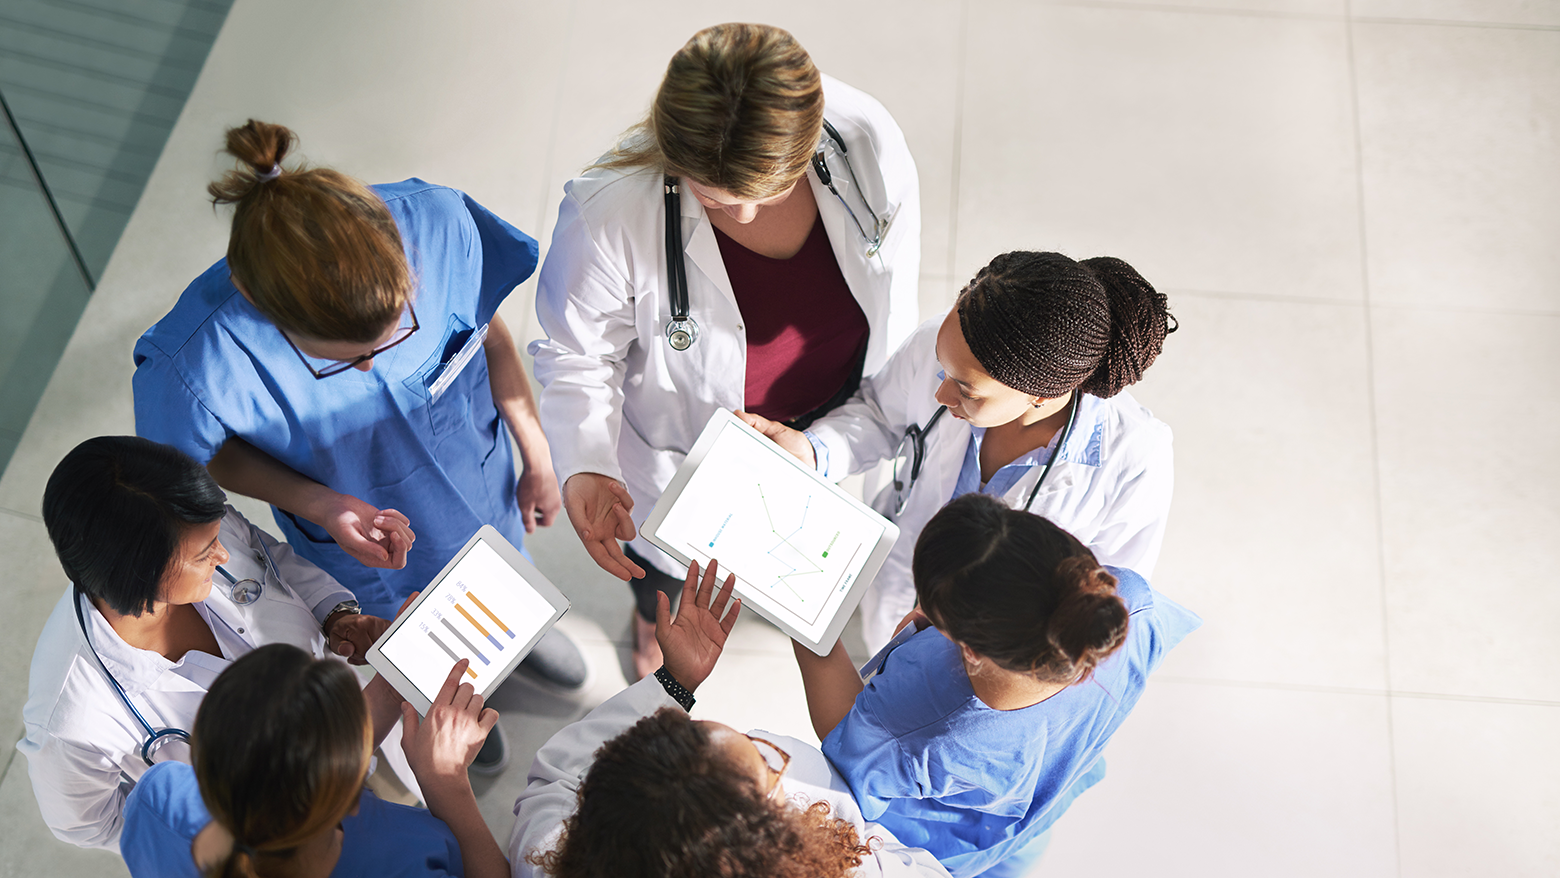 A group of doctors huddle to discuss paperwork